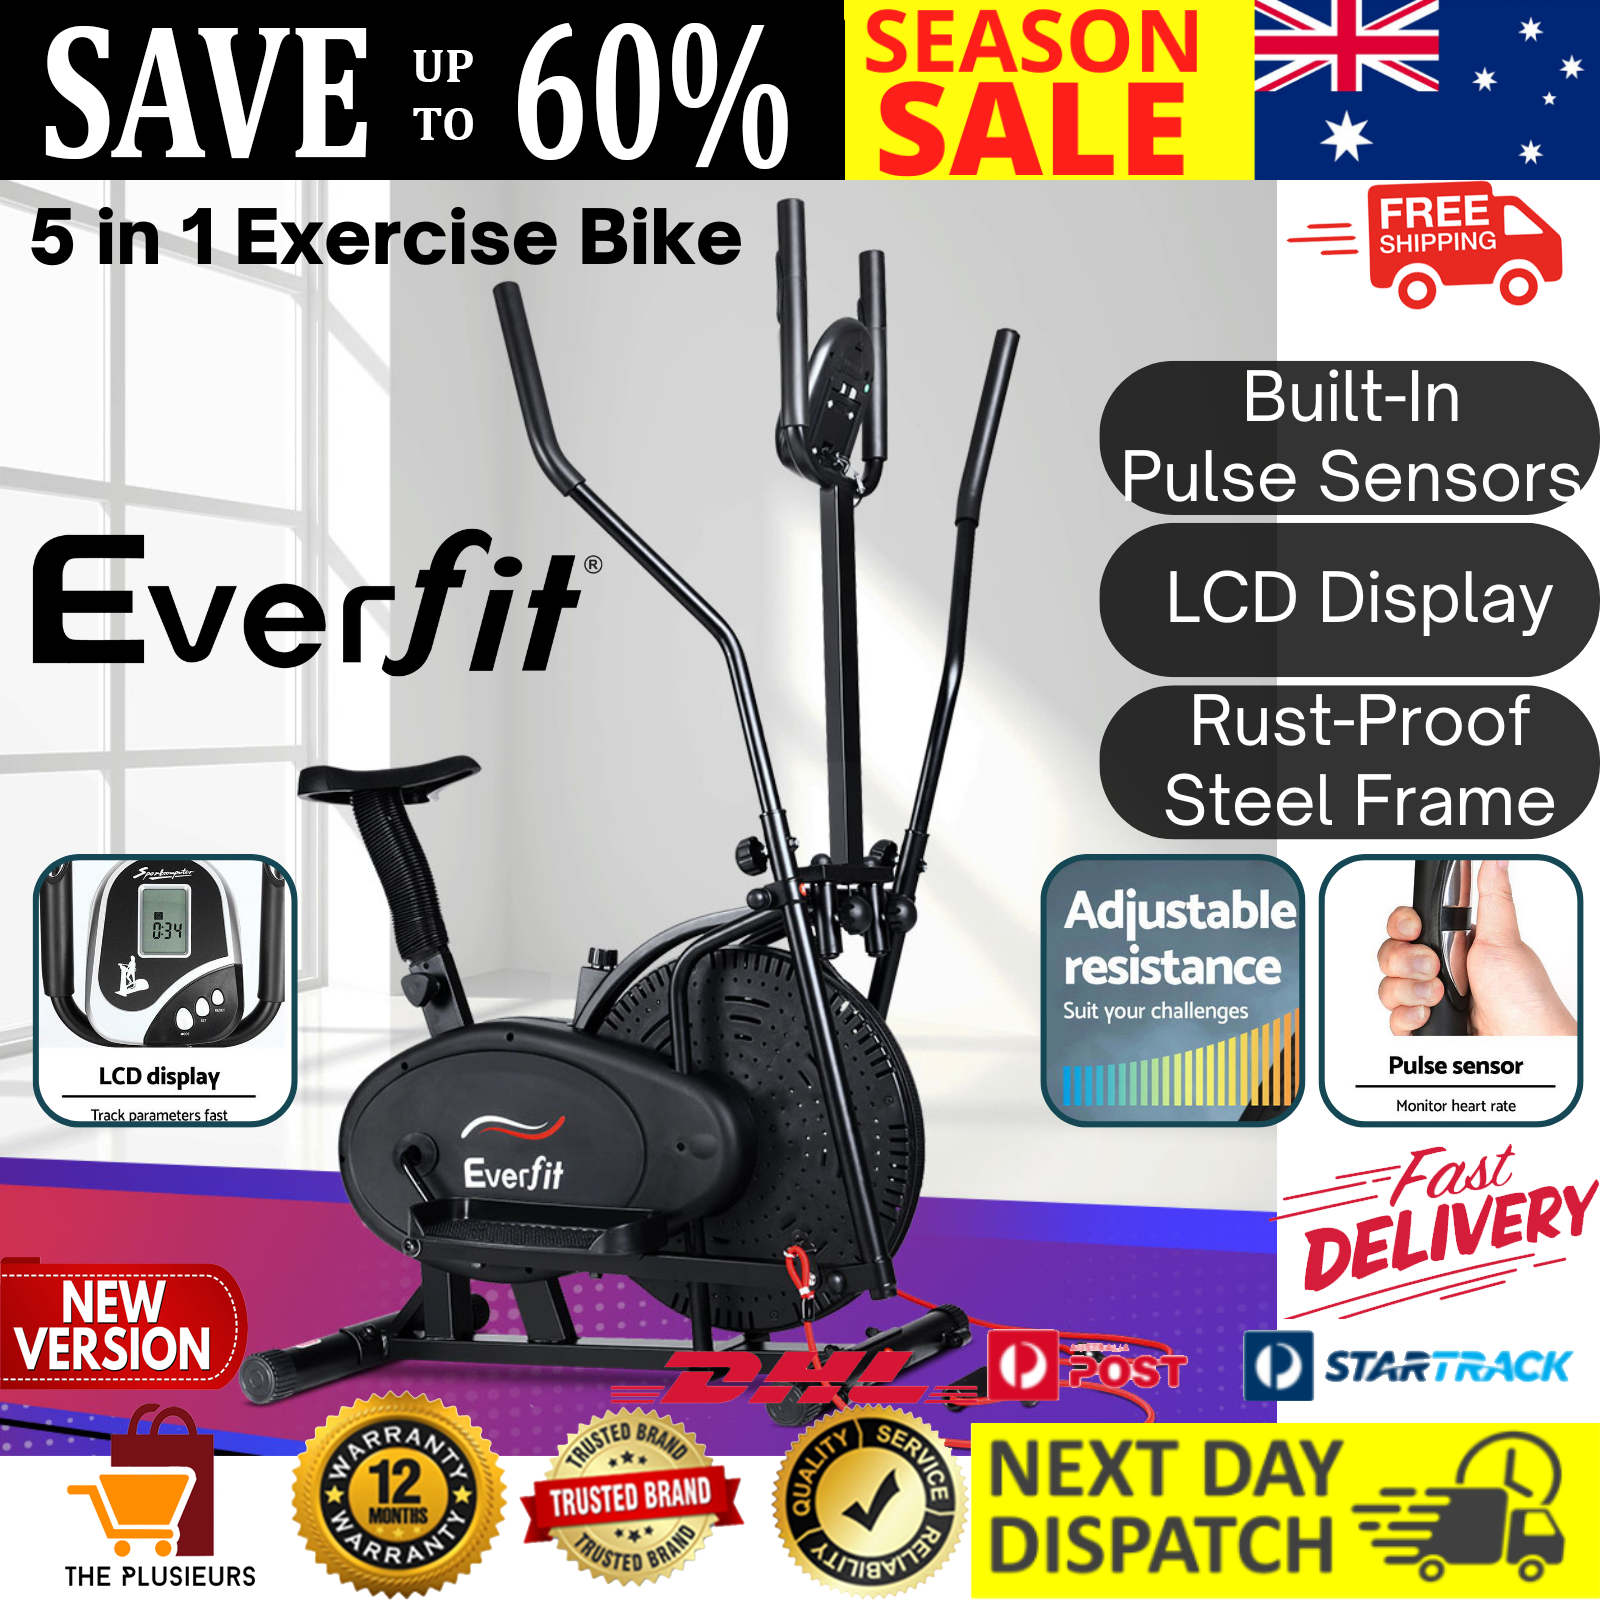 

Everfit Exercise Bike

